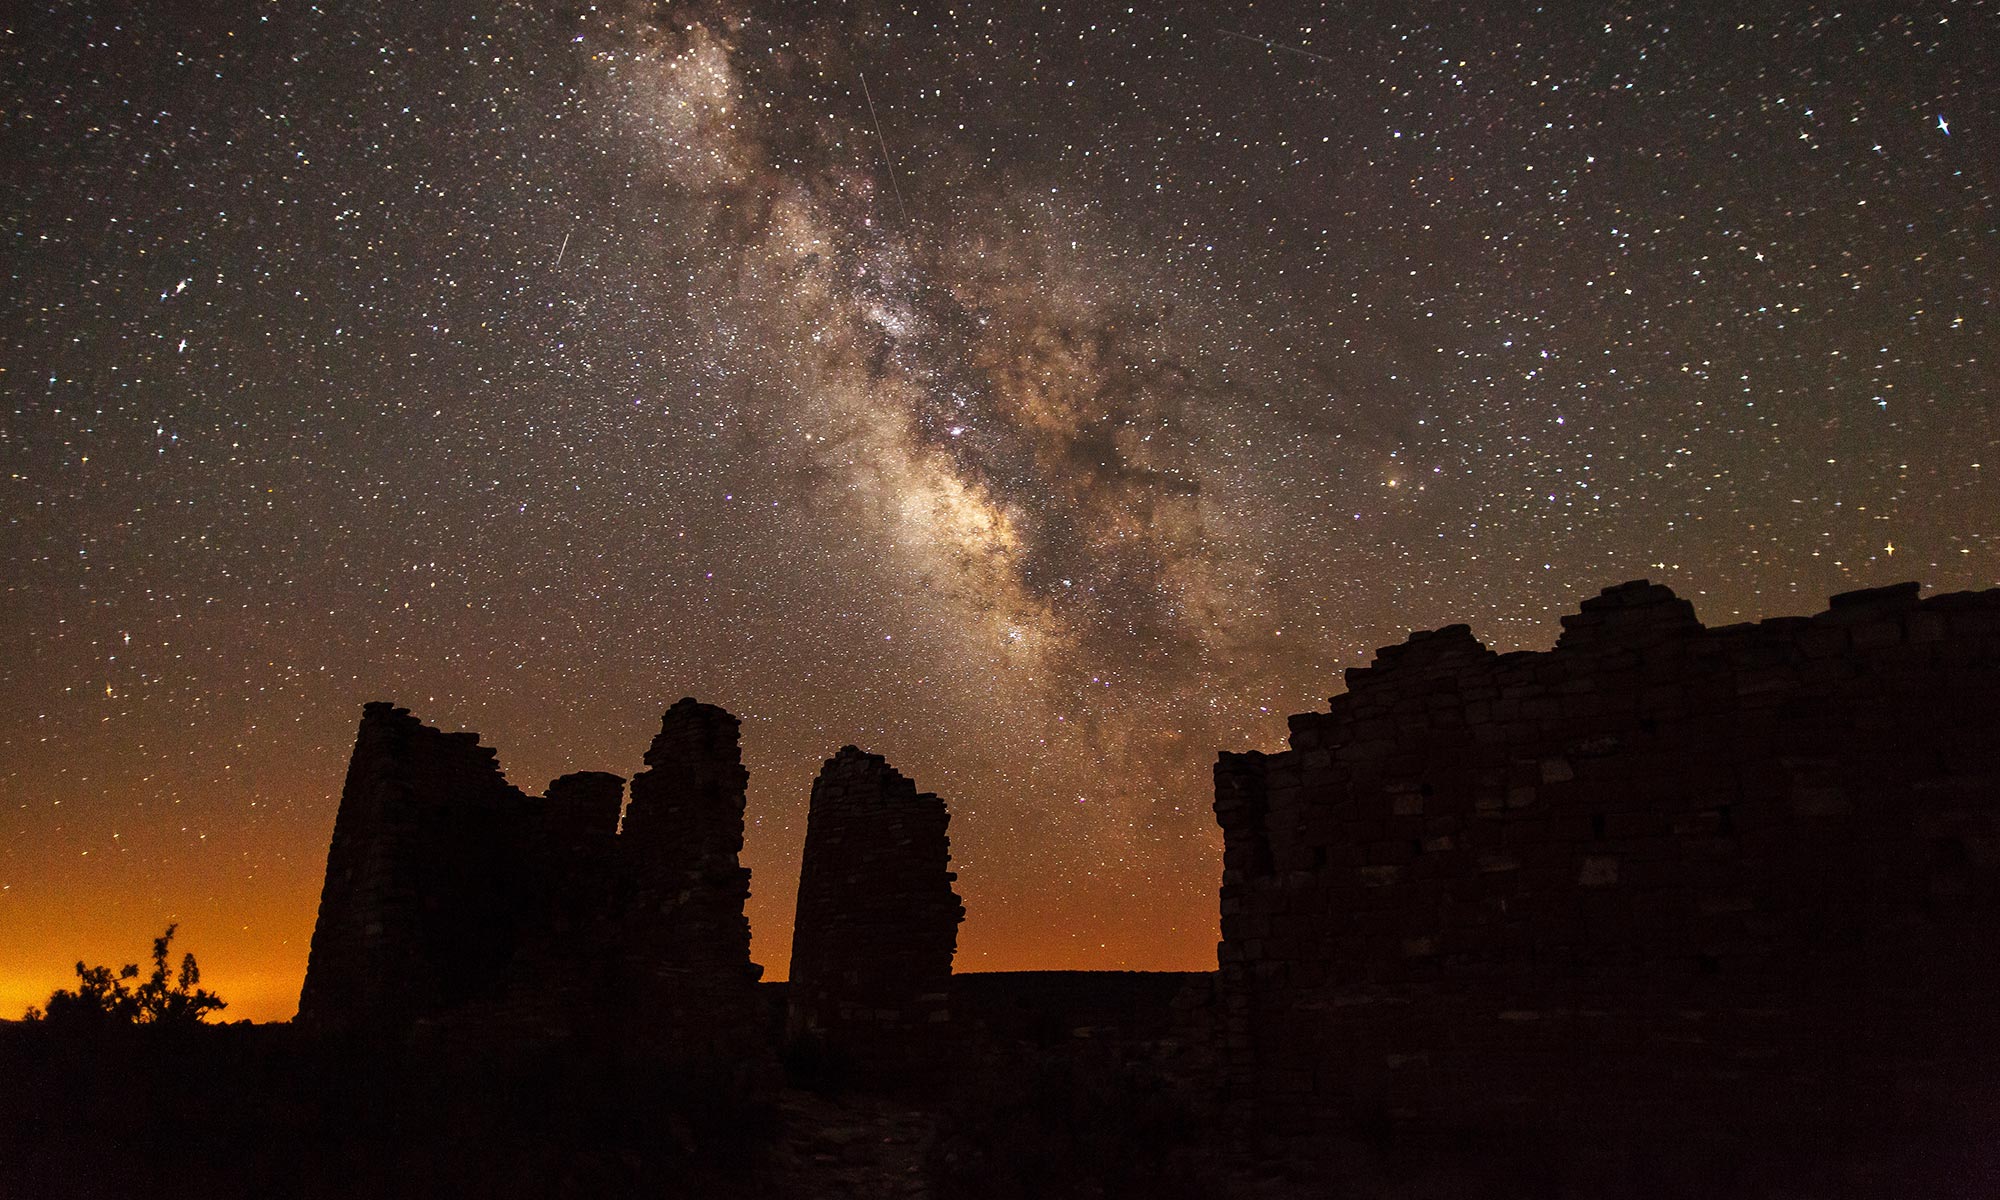 Milky Way at the Square Tower Group | NPS Photo by Jacob W. Frank